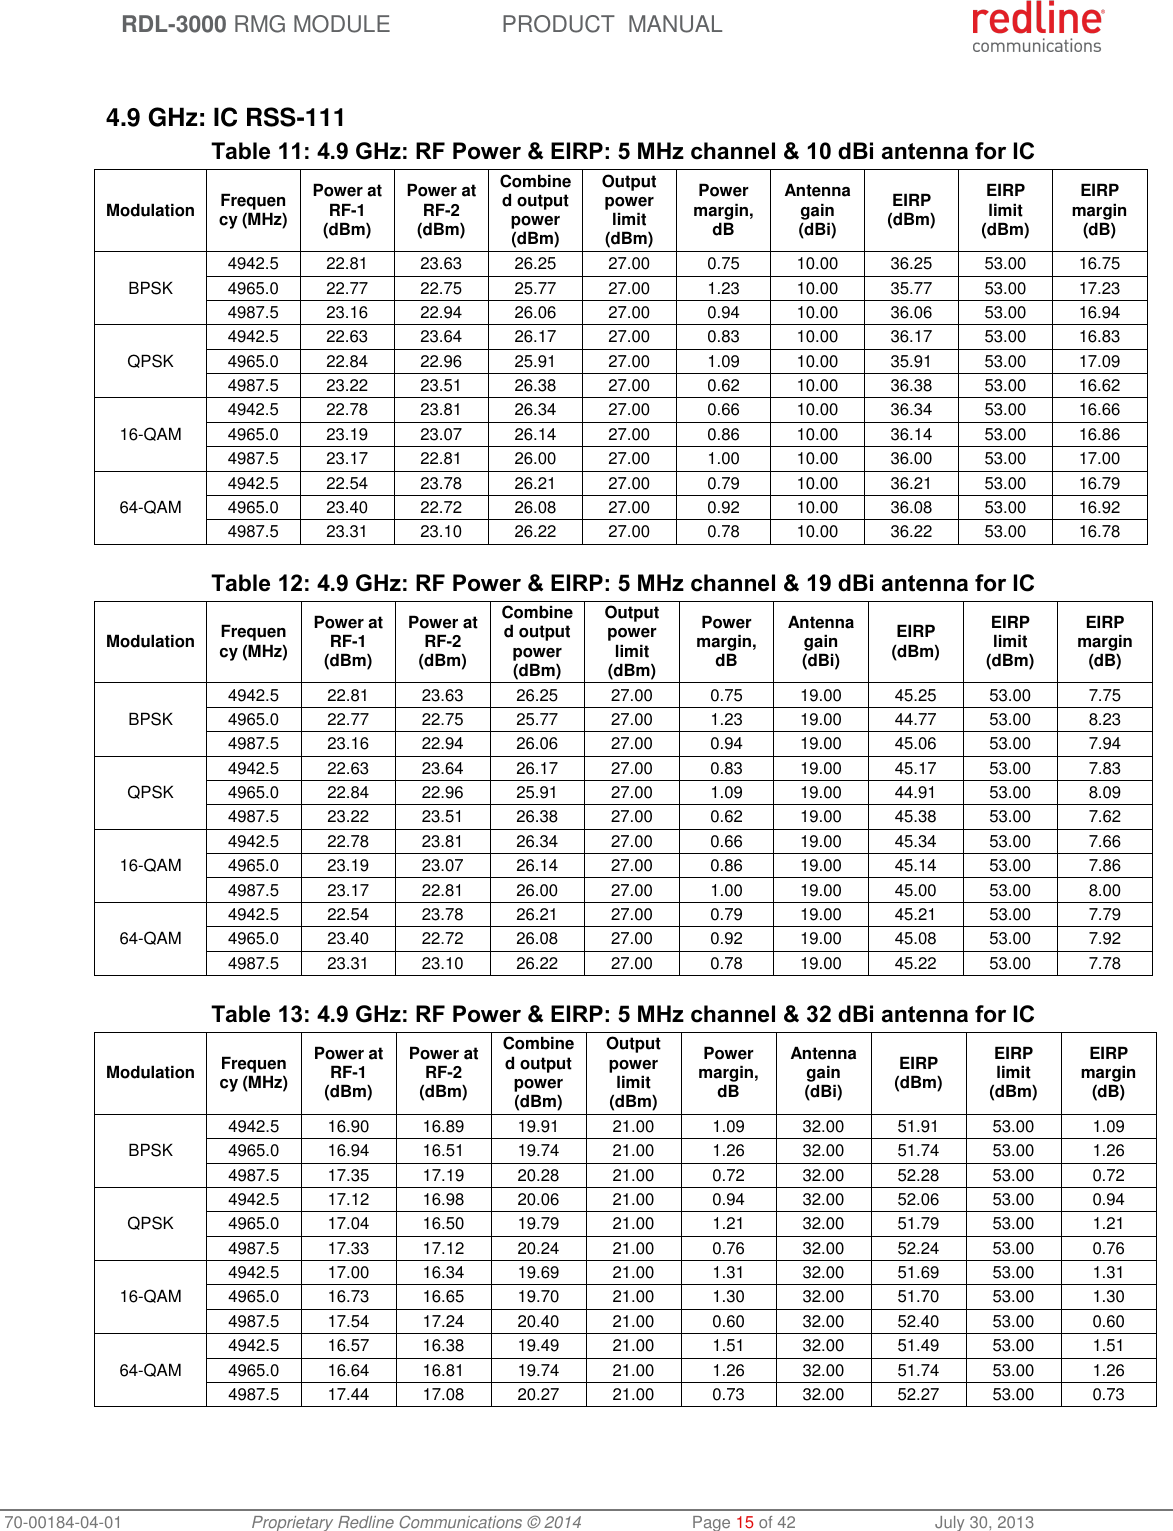  RDL-3000 RMG MODULE PRODUCT  MANUAL 70-00184-04-01 Proprietary Redline Communications © 2014  Page 15 of 42  July 30, 2013  4.9 GHz: IC RSS-111 Table 11: 4.9 GHz: RF Power &amp; EIRP: 5 MHz channel &amp; 10 dBi antenna for IC Modulation Frequency (MHz) Power at RF-1 (dBm) Power at RF-2 (dBm) Combined output power (dBm) Output power limit (dBm) Power margin, dB Antenna gain (dBi) EIRP (dBm) EIRP limit (dBm) EIRP margin (dB) BPSK 4942.5 22.81 23.63 26.25 27.00 0.75 10.00 36.25 53.00 16.75 4965.0 22.77 22.75 25.77 27.00 1.23 10.00 35.77 53.00 17.23 4987.5 23.16 22.94 26.06 27.00 0.94 10.00 36.06 53.00 16.94 QPSK 4942.5 22.63 23.64 26.17 27.00 0.83 10.00 36.17 53.00 16.83 4965.0 22.84 22.96 25.91 27.00 1.09 10.00 35.91 53.00 17.09 4987.5 23.22 23.51 26.38 27.00 0.62 10.00 36.38 53.00 16.62 16-QAM 4942.5 22.78 23.81 26.34 27.00 0.66 10.00 36.34 53.00 16.66 4965.0 23.19 23.07 26.14 27.00 0.86 10.00 36.14 53.00 16.86 4987.5 23.17 22.81 26.00 27.00 1.00 10.00 36.00 53.00 17.00 64-QAM 4942.5 22.54 23.78 26.21 27.00 0.79 10.00 36.21 53.00 16.79 4965.0 23.40 22.72 26.08 27.00 0.92 10.00 36.08 53.00 16.92 4987.5 23.31 23.10 26.22 27.00 0.78 10.00 36.22 53.00 16.78  Table 12: 4.9 GHz: RF Power &amp; EIRP: 5 MHz channel &amp; 19 dBi antenna for IC Modulation Frequency (MHz) Power at RF-1 (dBm) Power at RF-2 (dBm) Combined output power (dBm) Output power limit (dBm) Power margin, dB Antenna gain (dBi) EIRP (dBm) EIRP limit (dBm) EIRP margin (dB) BPSK 4942.5 22.81 23.63 26.25 27.00 0.75 19.00 45.25 53.00 7.75 4965.0 22.77 22.75 25.77 27.00 1.23 19.00 44.77 53.00 8.23 4987.5 23.16 22.94 26.06 27.00 0.94 19.00 45.06 53.00 7.94 QPSK 4942.5 22.63 23.64 26.17 27.00 0.83 19.00 45.17 53.00 7.83 4965.0 22.84 22.96 25.91 27.00 1.09 19.00 44.91 53.00 8.09 4987.5 23.22 23.51 26.38 27.00 0.62 19.00 45.38 53.00 7.62 16-QAM 4942.5 22.78 23.81 26.34 27.00 0.66 19.00 45.34 53.00 7.66 4965.0 23.19 23.07 26.14 27.00 0.86 19.00 45.14 53.00 7.86 4987.5 23.17 22.81 26.00 27.00 1.00 19.00 45.00 53.00 8.00 64-QAM 4942.5 22.54 23.78 26.21 27.00 0.79 19.00 45.21 53.00 7.79 4965.0 23.40 22.72 26.08 27.00 0.92 19.00 45.08 53.00 7.92 4987.5 23.31 23.10 26.22 27.00 0.78 19.00 45.22 53.00 7.78  Table 13: 4.9 GHz: RF Power &amp; EIRP: 5 MHz channel &amp; 32 dBi antenna for IC Modulation Frequency (MHz) Power at RF-1 (dBm) Power at RF-2 (dBm) Combined output power (dBm) Output power limit (dBm) Power margin, dB Antenna gain (dBi) EIRP (dBm) EIRP limit (dBm) EIRP margin (dB) BPSK 4942.5 16.90 16.89 19.91 21.00 1.09 32.00 51.91 53.00 1.09 4965.0 16.94 16.51 19.74 21.00 1.26 32.00 51.74 53.00 1.26 4987.5 17.35 17.19 20.28 21.00 0.72 32.00 52.28 53.00 0.72 QPSK 4942.5 17.12 16.98 20.06 21.00 0.94 32.00 52.06 53.00 0.94 4965.0 17.04 16.50 19.79 21.00 1.21 32.00 51.79 53.00 1.21 4987.5 17.33 17.12 20.24 21.00 0.76 32.00 52.24 53.00 0.76 16-QAM 4942.5 17.00 16.34 19.69 21.00 1.31 32.00 51.69 53.00 1.31 4965.0 16.73 16.65 19.70 21.00 1.30 32.00 51.70 53.00 1.30 4987.5 17.54 17.24 20.40 21.00 0.60 32.00 52.40 53.00 0.60 64-QAM 4942.5 16.57 16.38 19.49 21.00 1.51 32.00 51.49 53.00 1.51 4965.0 16.64 16.81 19.74 21.00 1.26 32.00 51.74 53.00 1.26 4987.5 17.44 17.08 20.27 21.00 0.73 32.00 52.27 53.00 0.73  